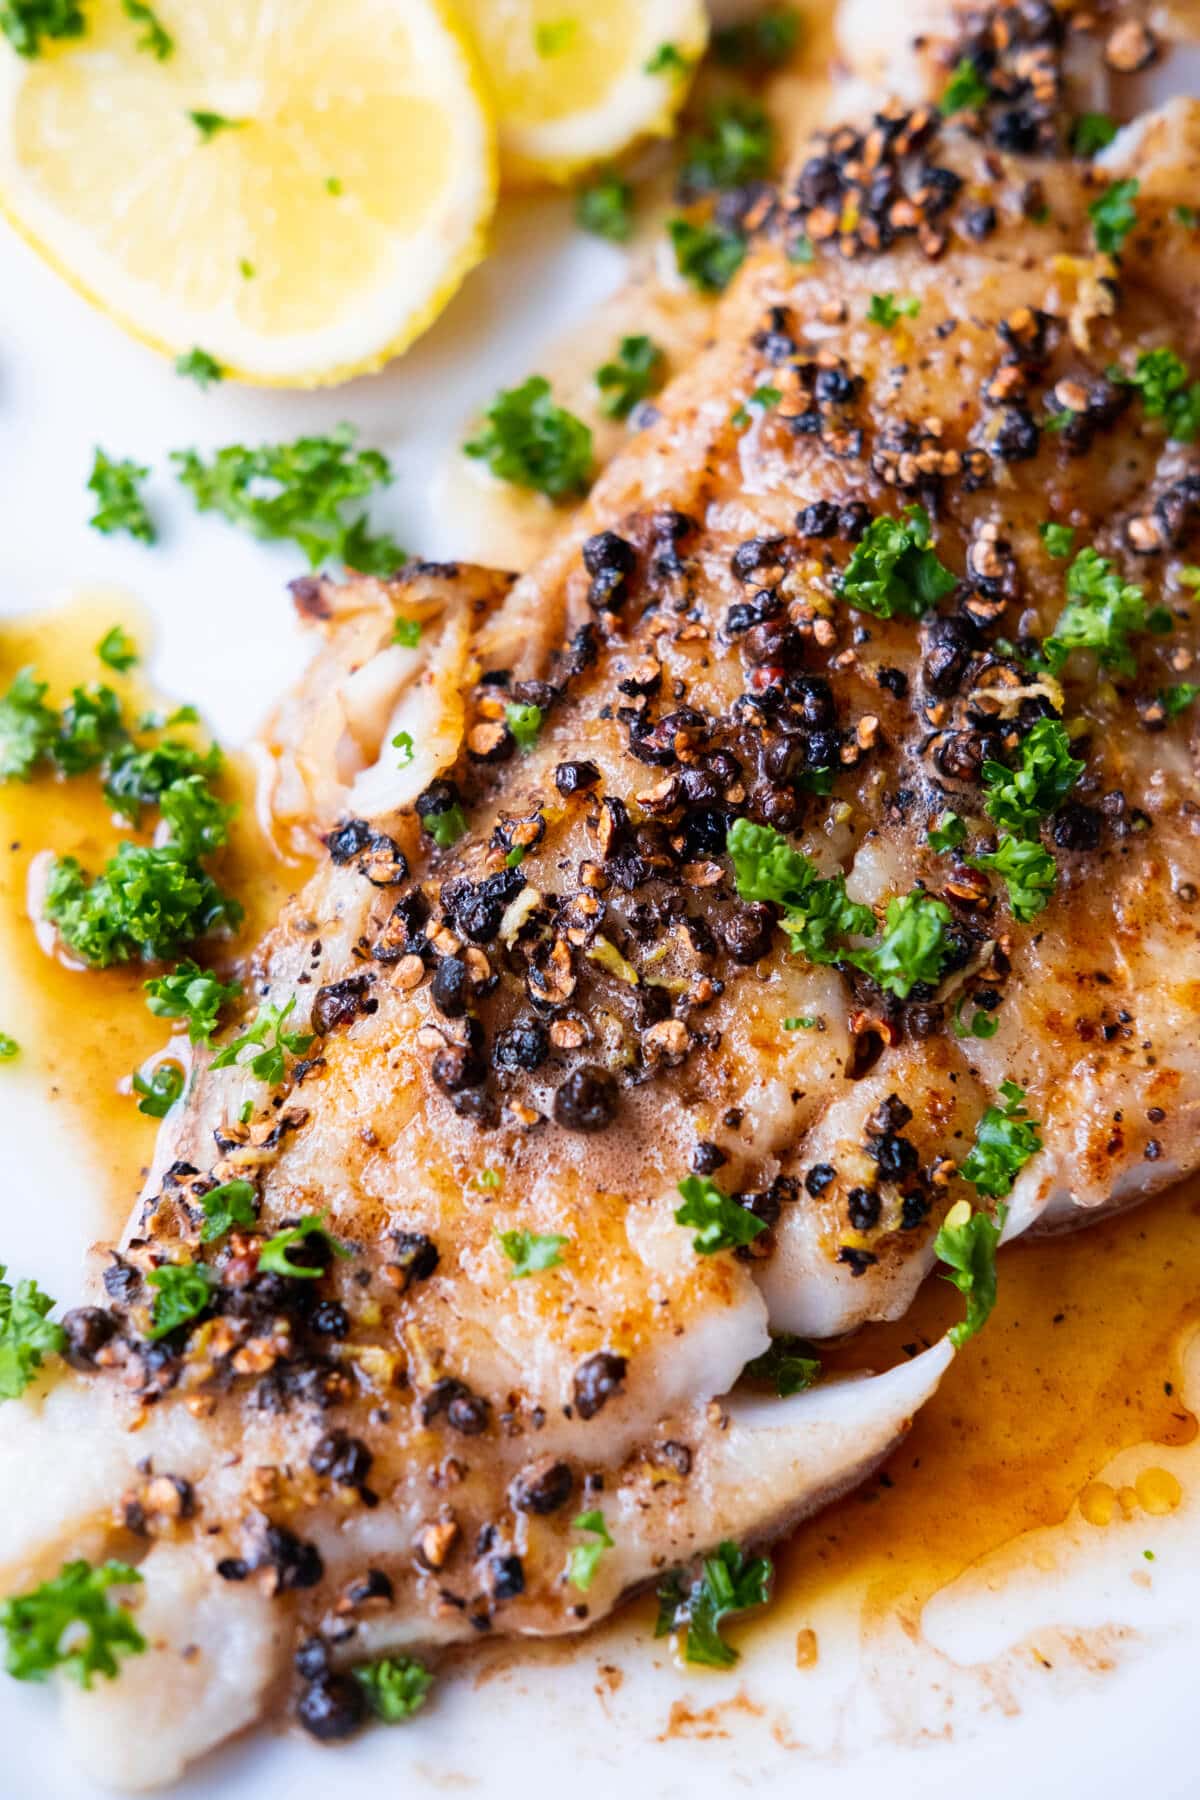 Crispy seared fish topped with crushed black peppercorns and drizzled with buttery sauce. 